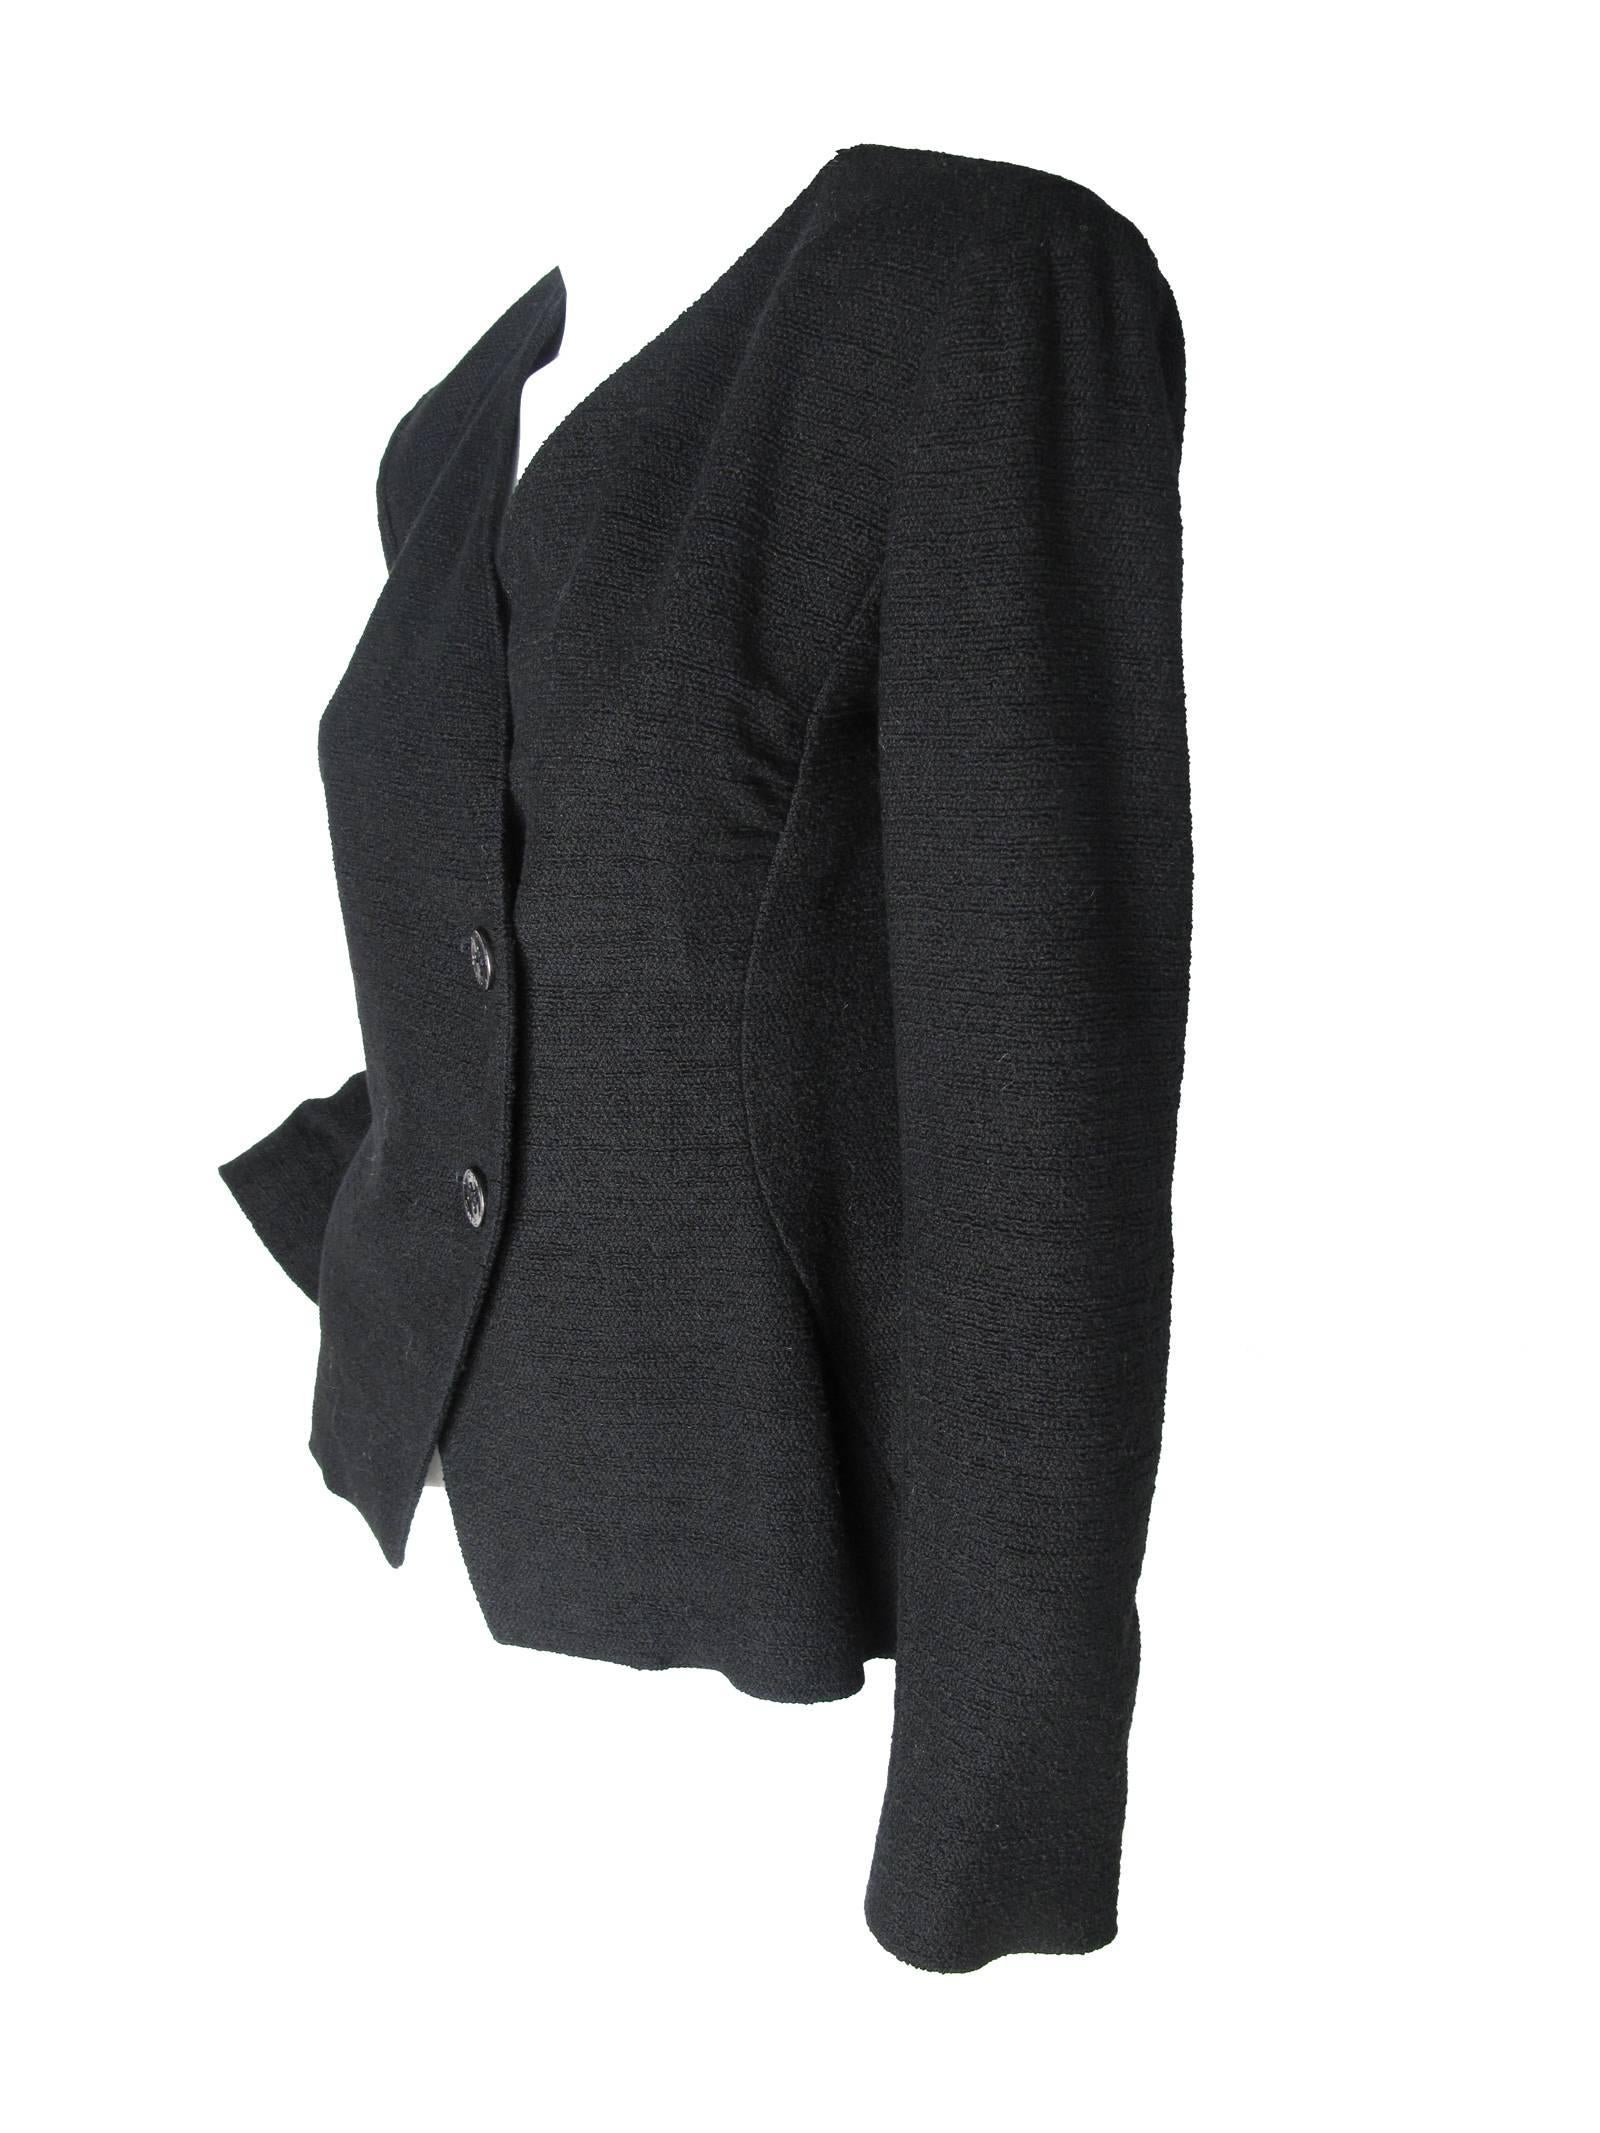 2000 Chanel cotton/ nylon black blazer, two front buttons.  Chain on inside hem. Condition: Excellent. Size 40. 

38